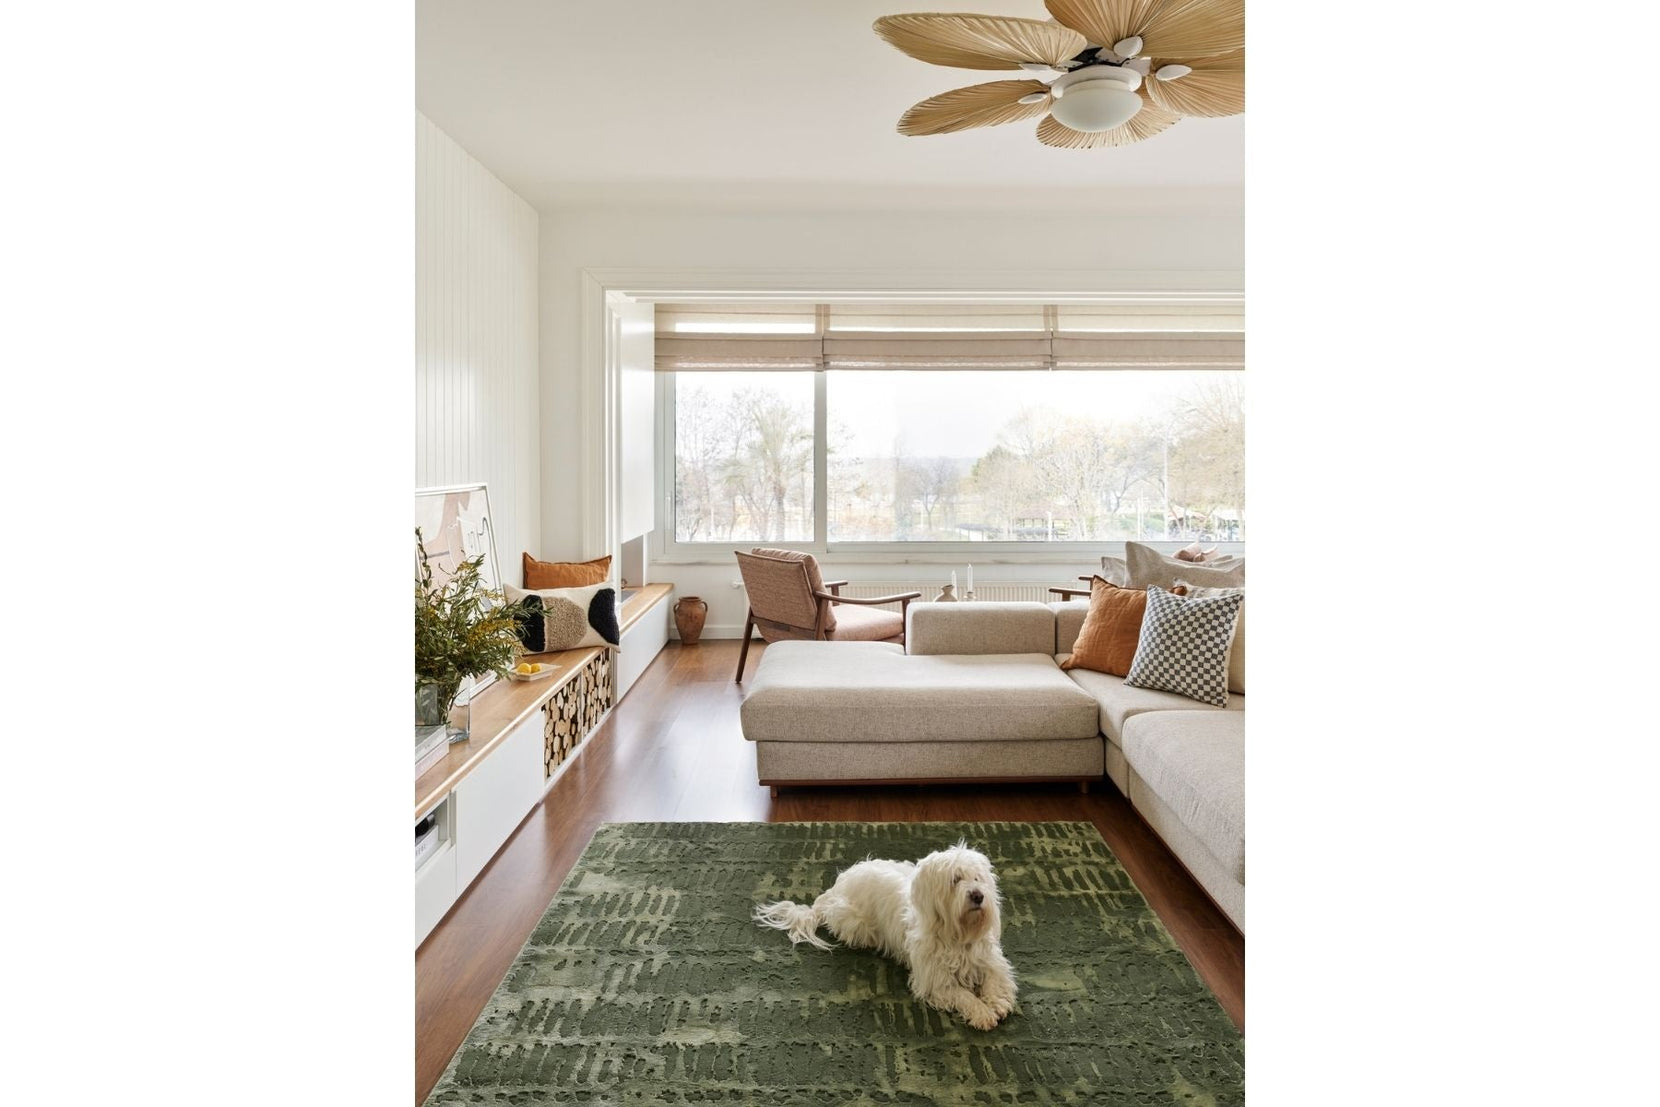 Machine Washable Rug, 100% Recycled, Kid & Pet Friendly - Shell